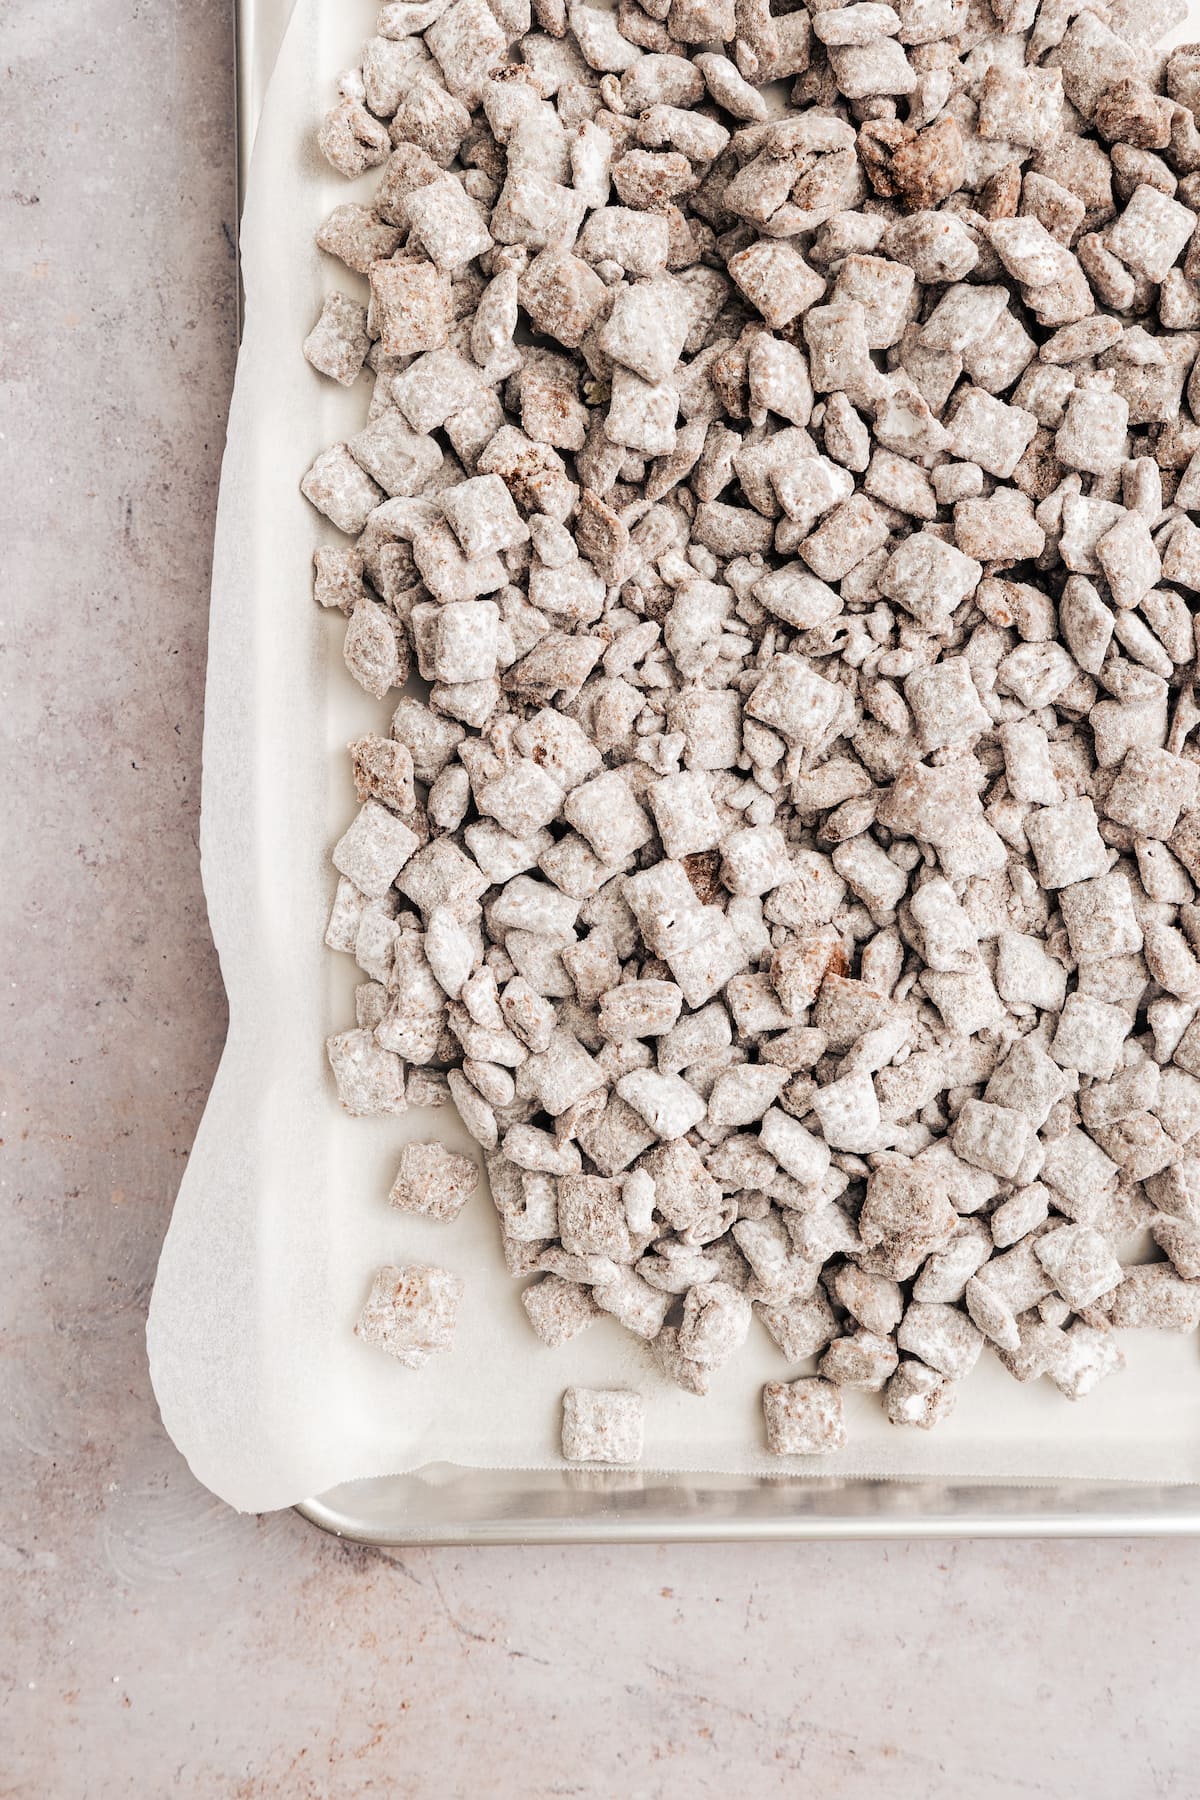 Overhead view of puppy chow on a parchment-lined baking sheet.